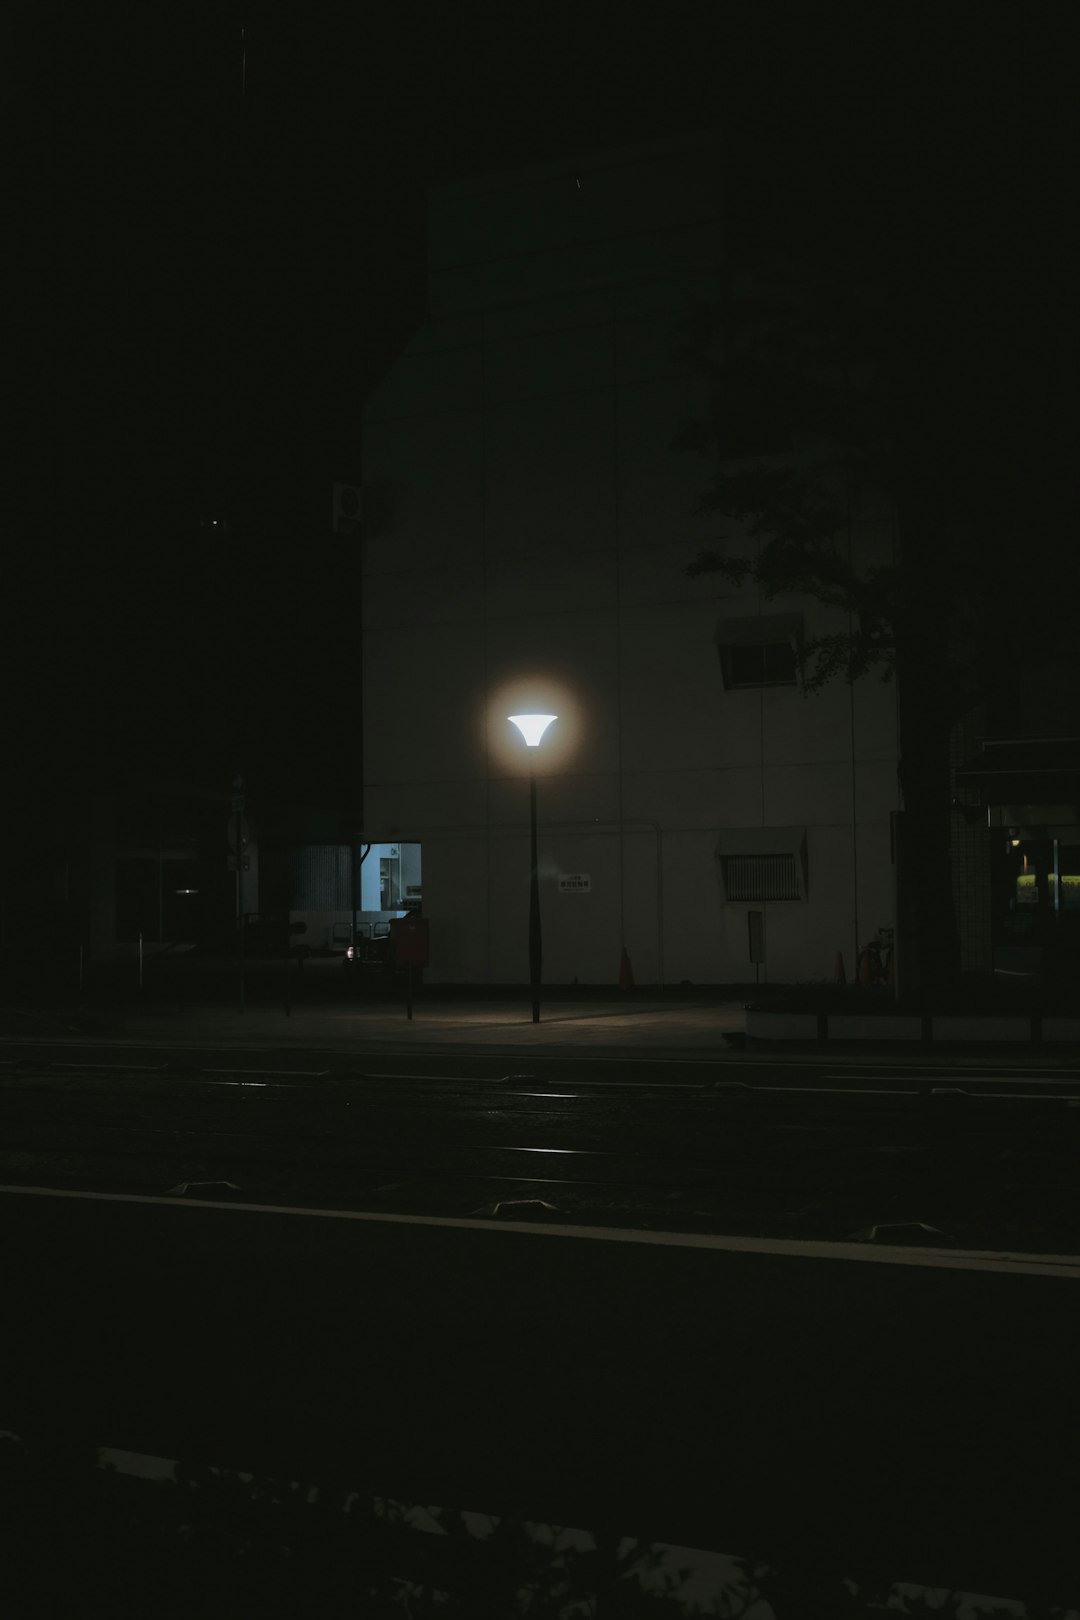 street light turned on during night time